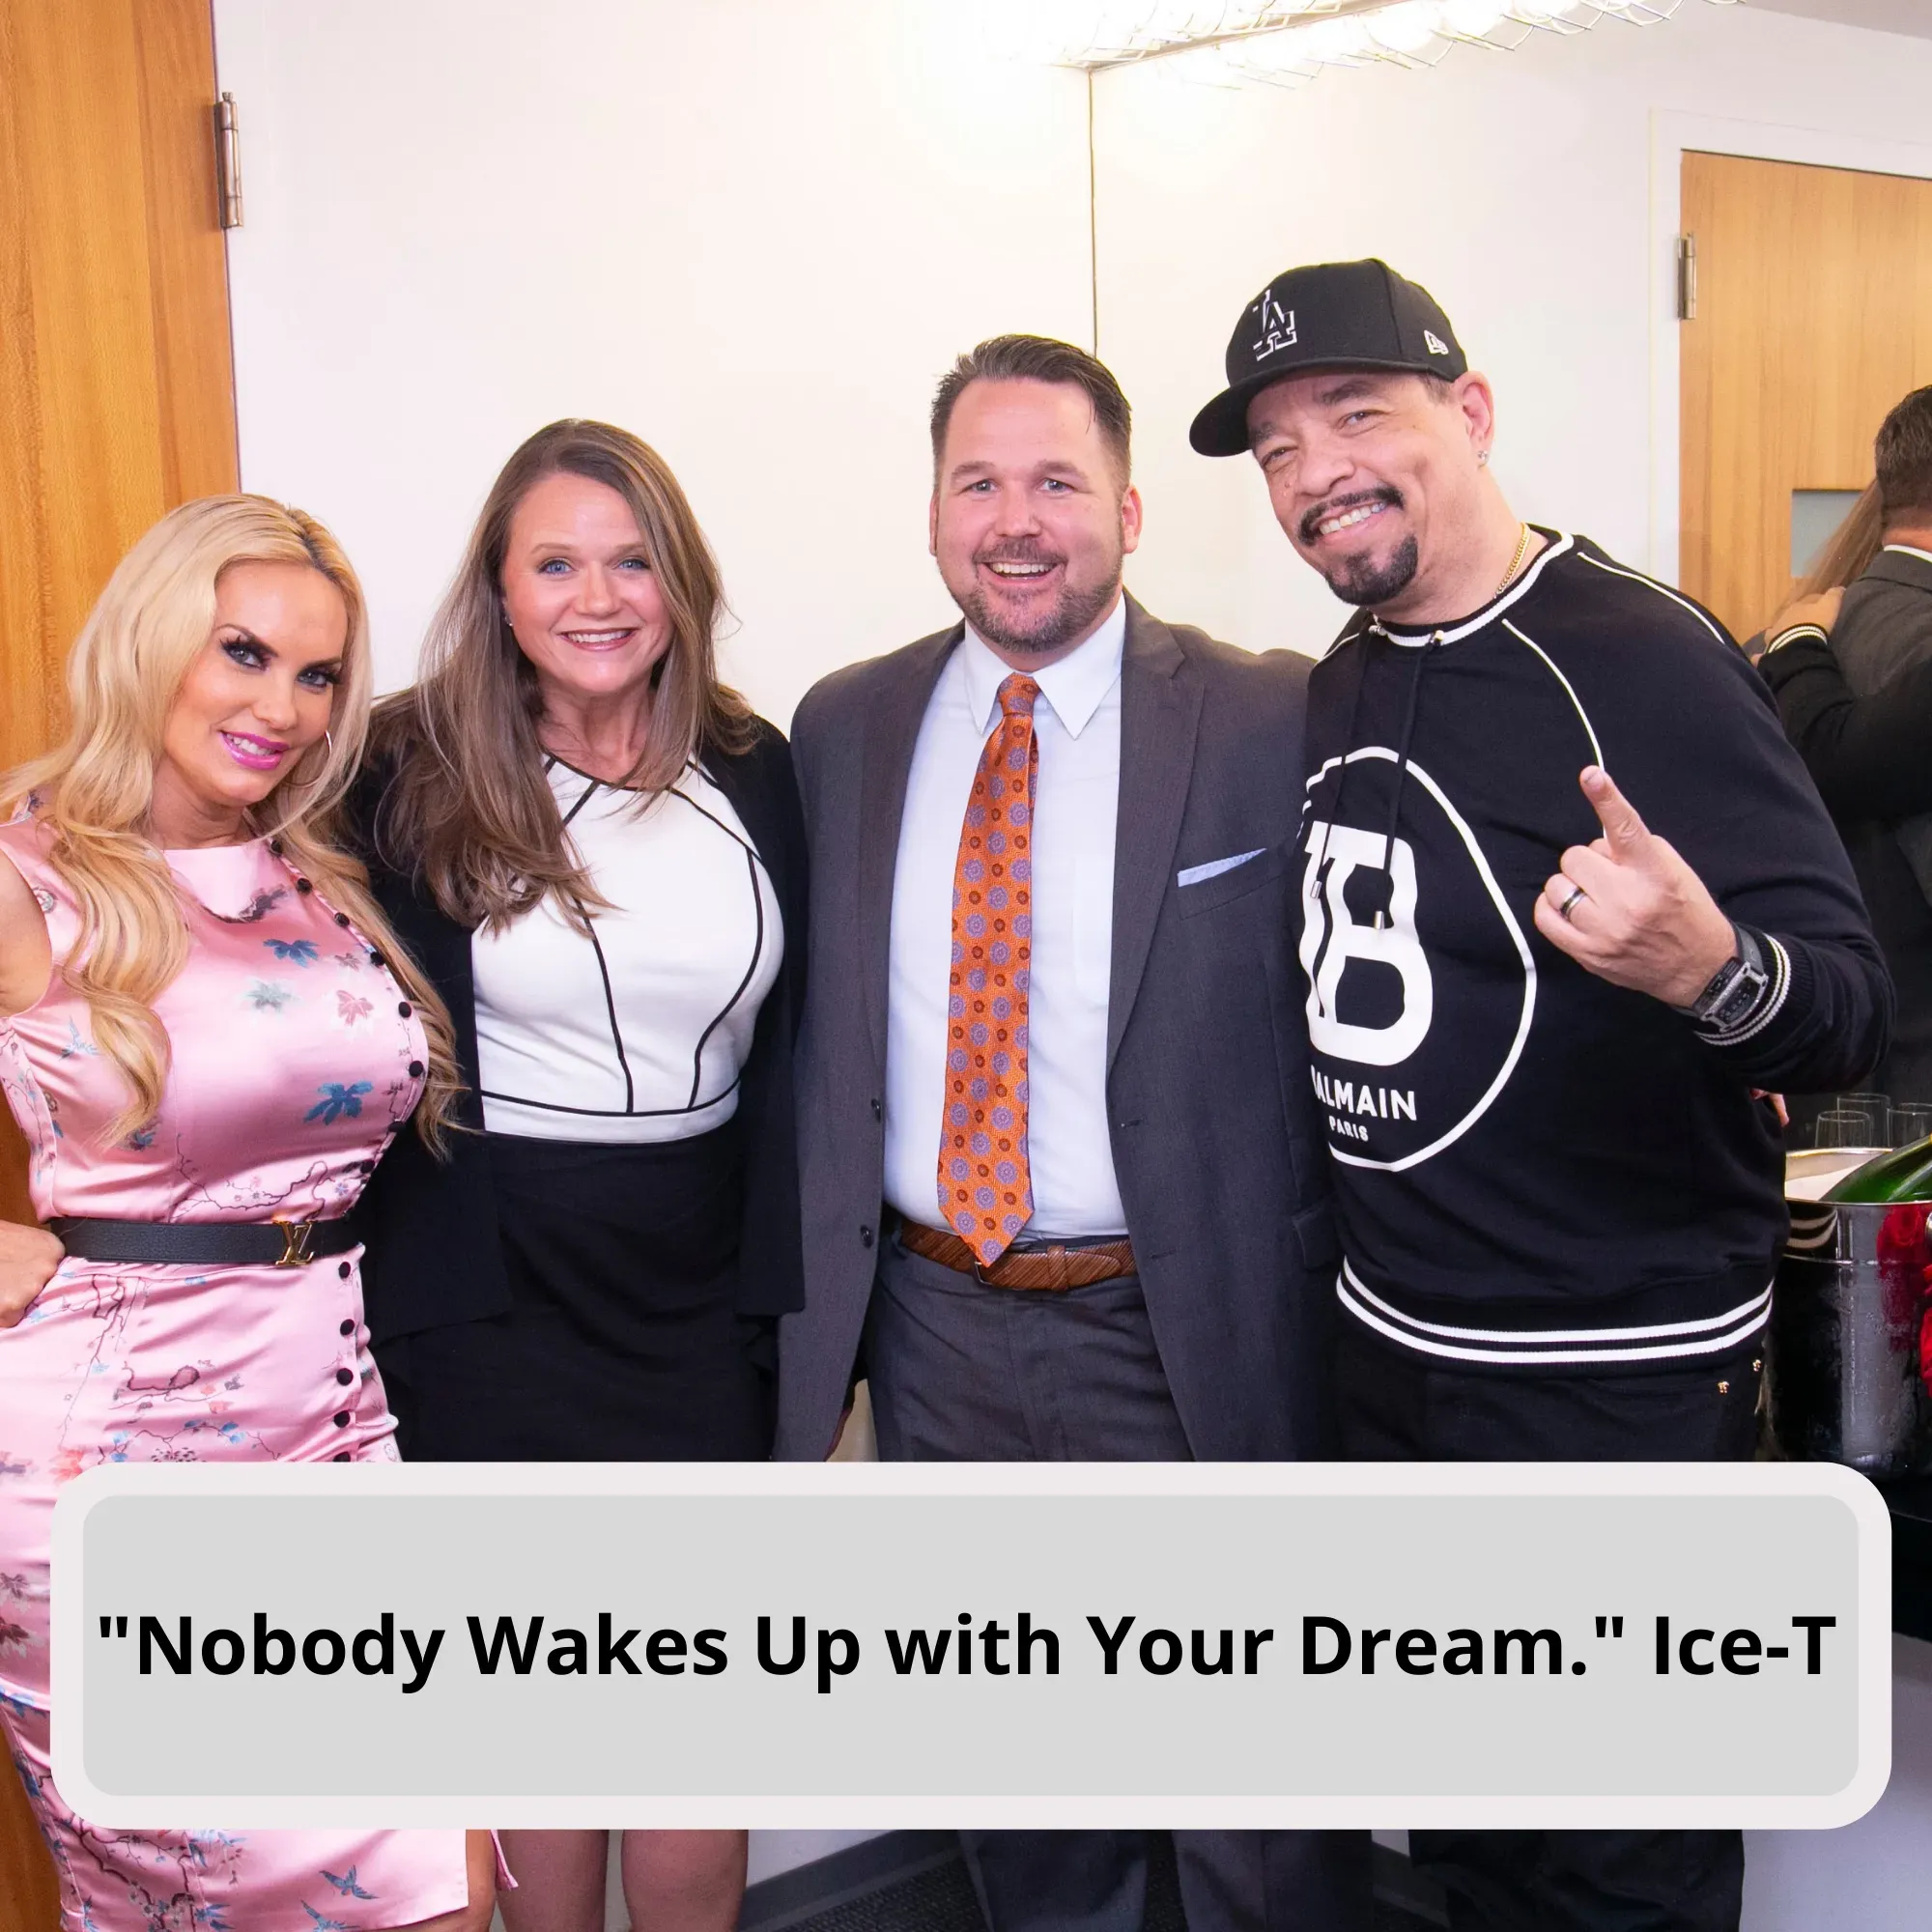 Eric Couch and Catherine Couch with Ice-T and Coco - "Nobody wakes up with your dream."